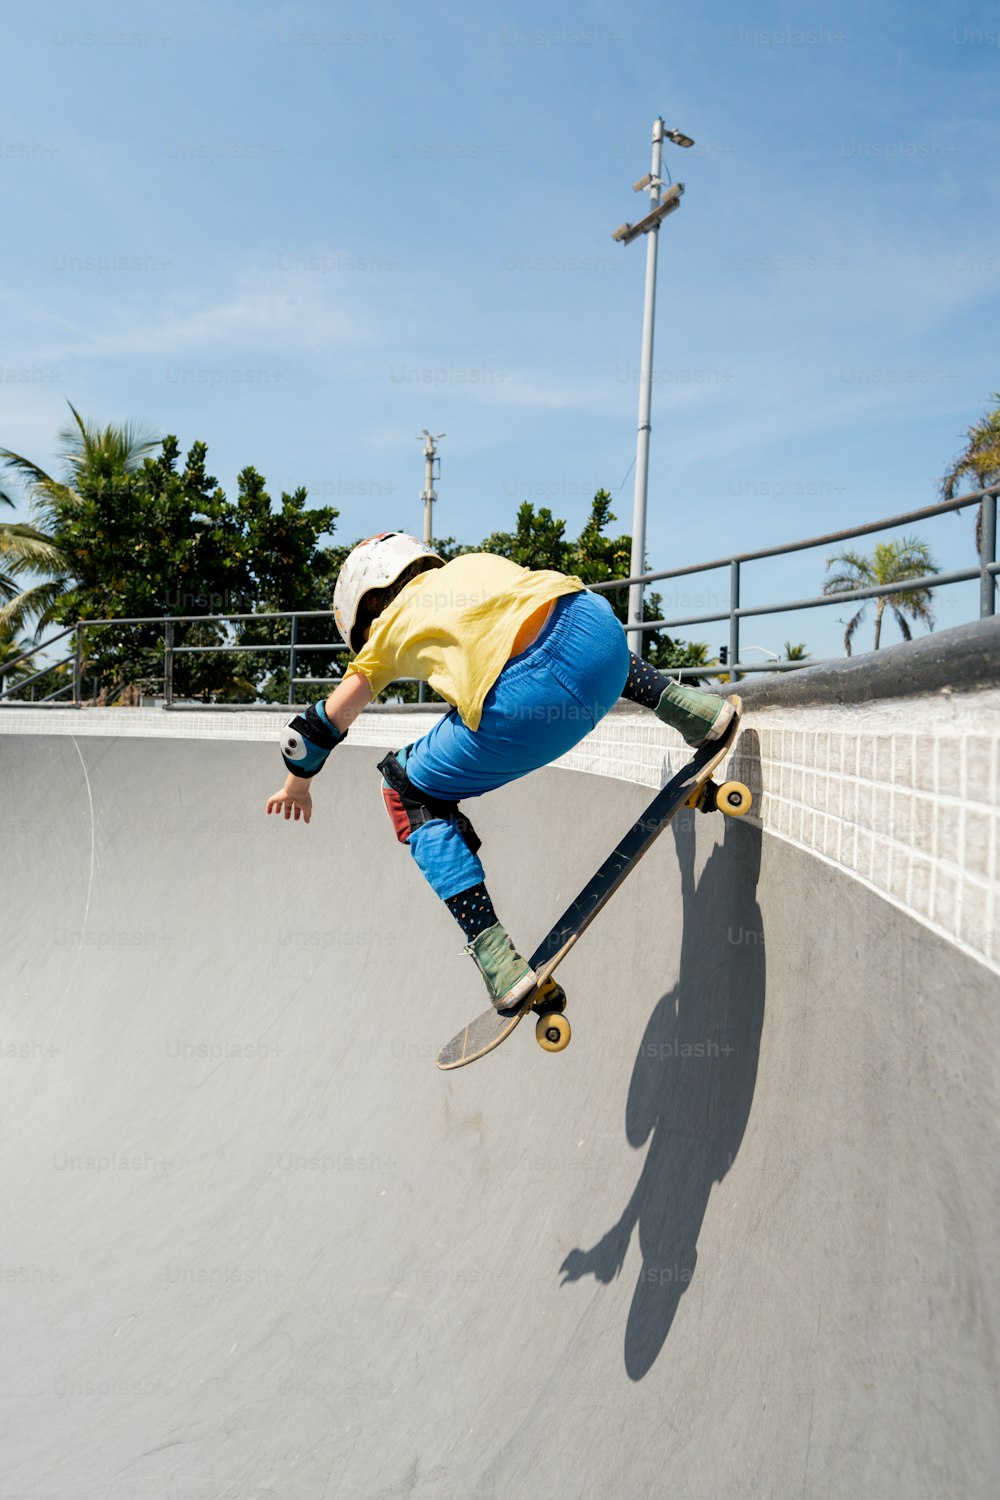 a man riding a skateboard up the side of a ramp